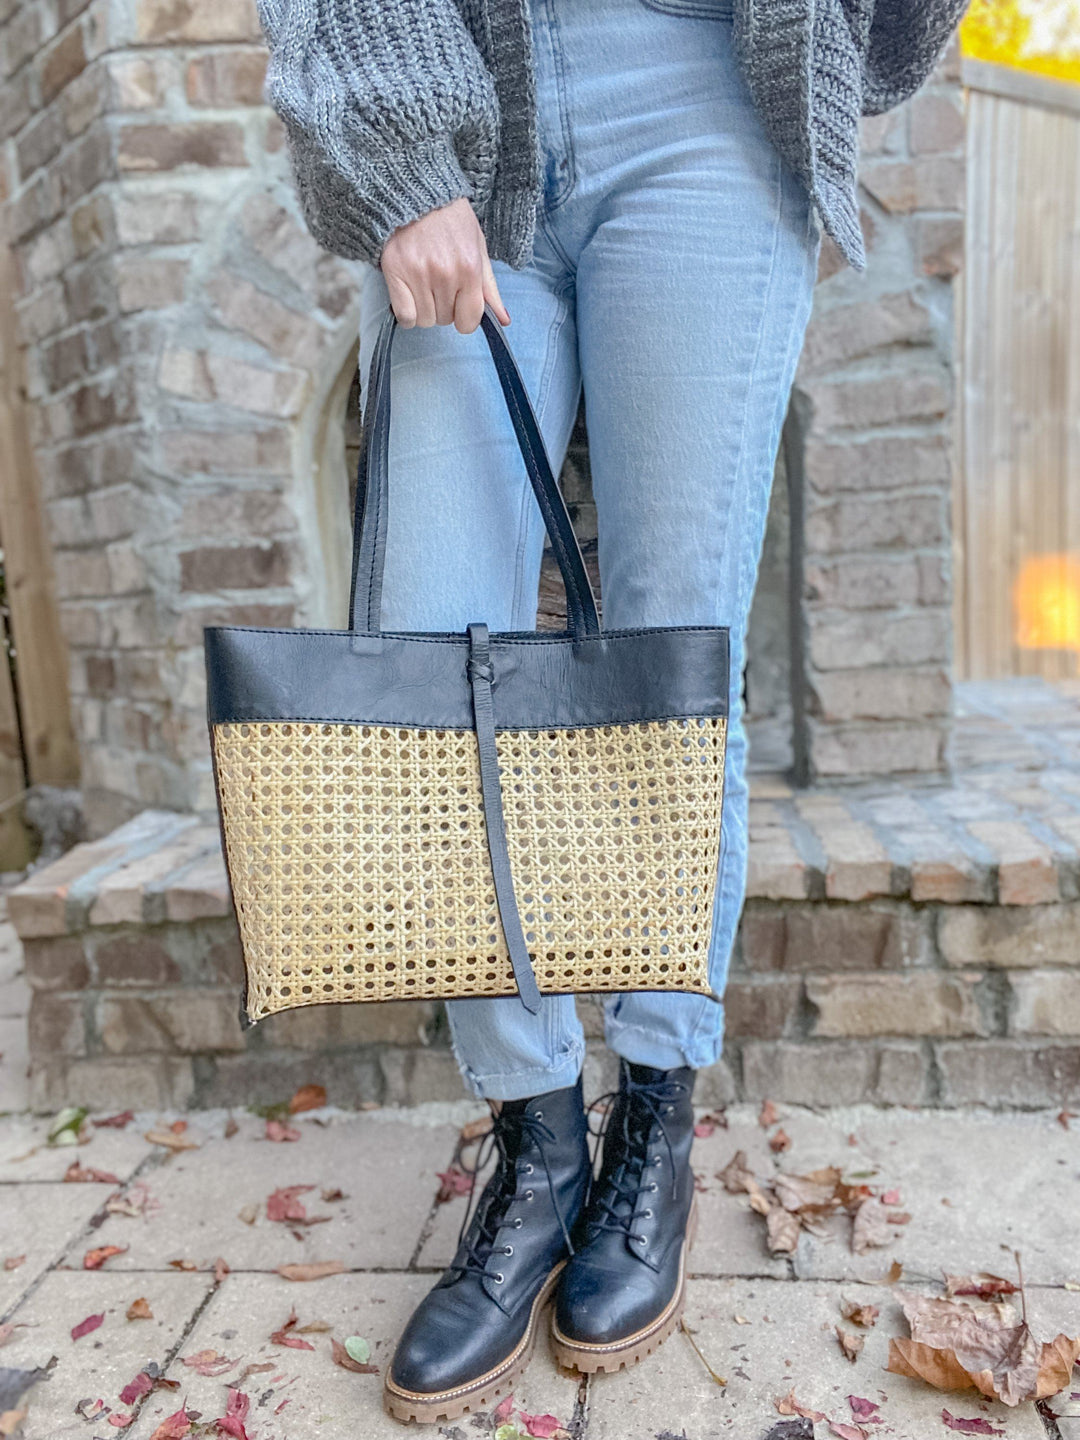 Madeline Cane and Leather Tote in Black by POPPY + SAGE